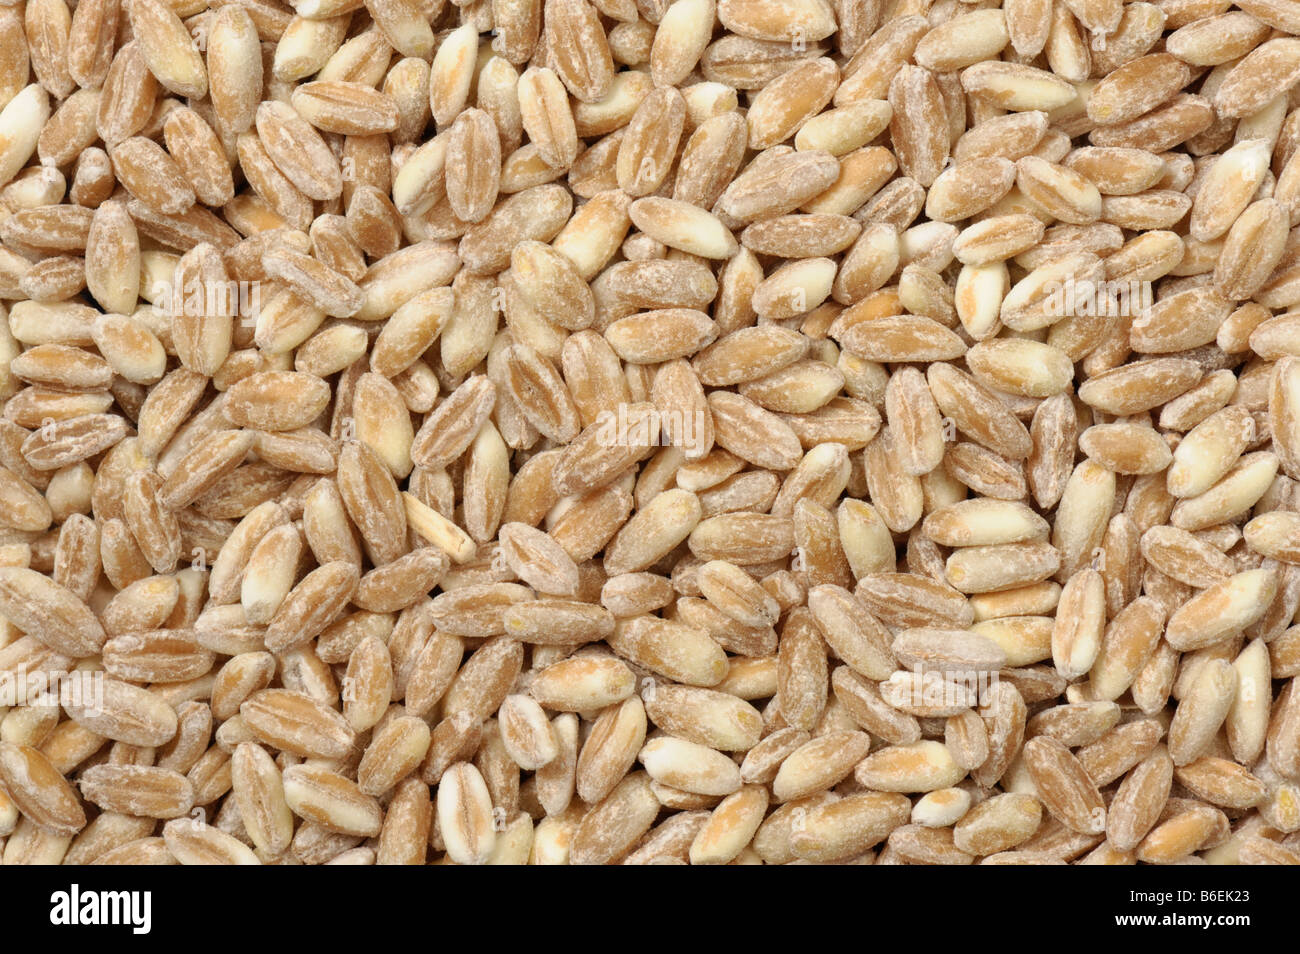 Organic milled spelt wheat as sold in health food shops grown in China Stock Photo